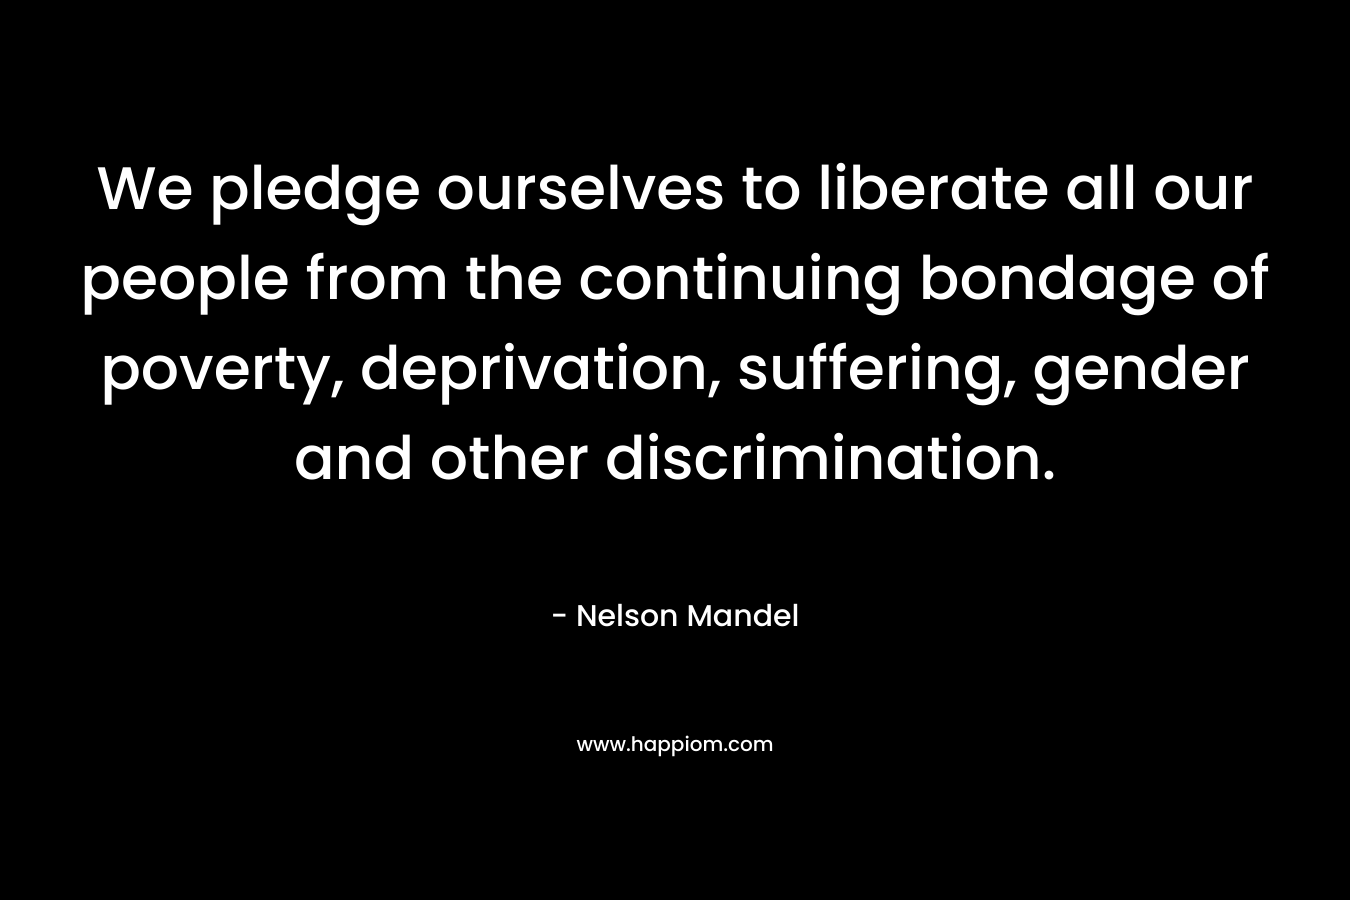 We pledge ourselves to liberate all our people from the continuing bondage of poverty, deprivation, suffering, gender and other discrimination.